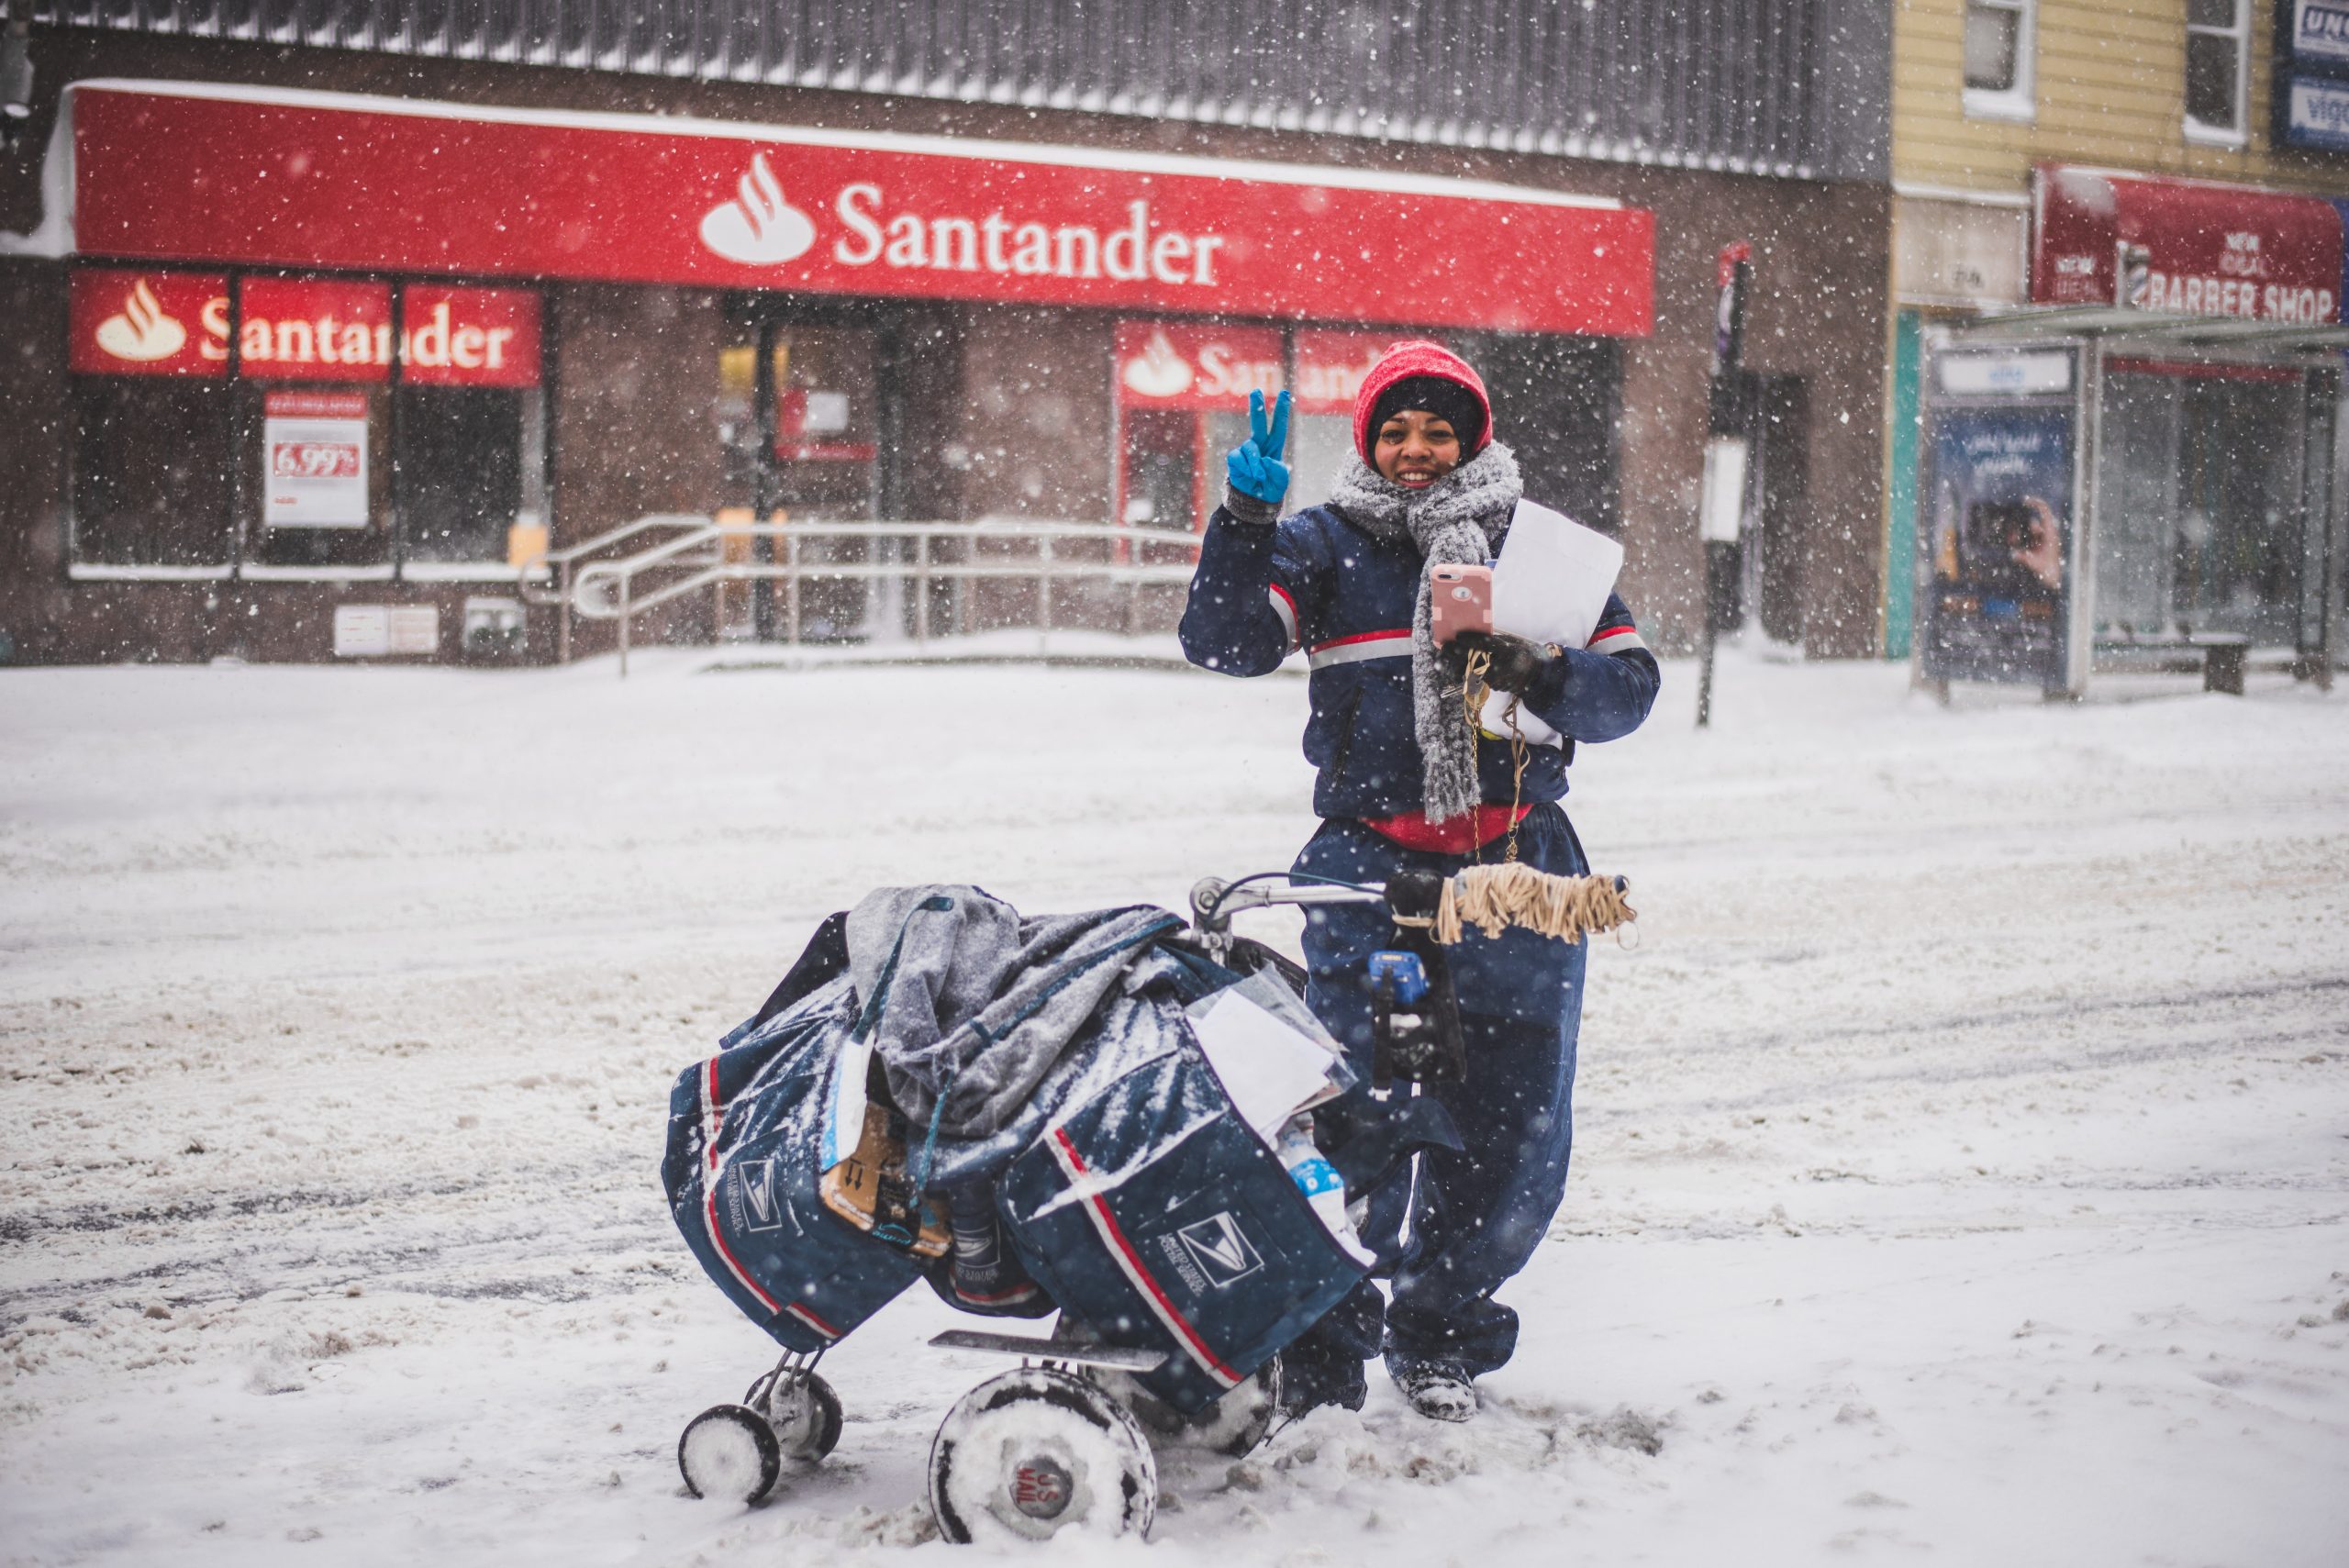 Employee of the post office delivering direct mail marketing pieces in the snow